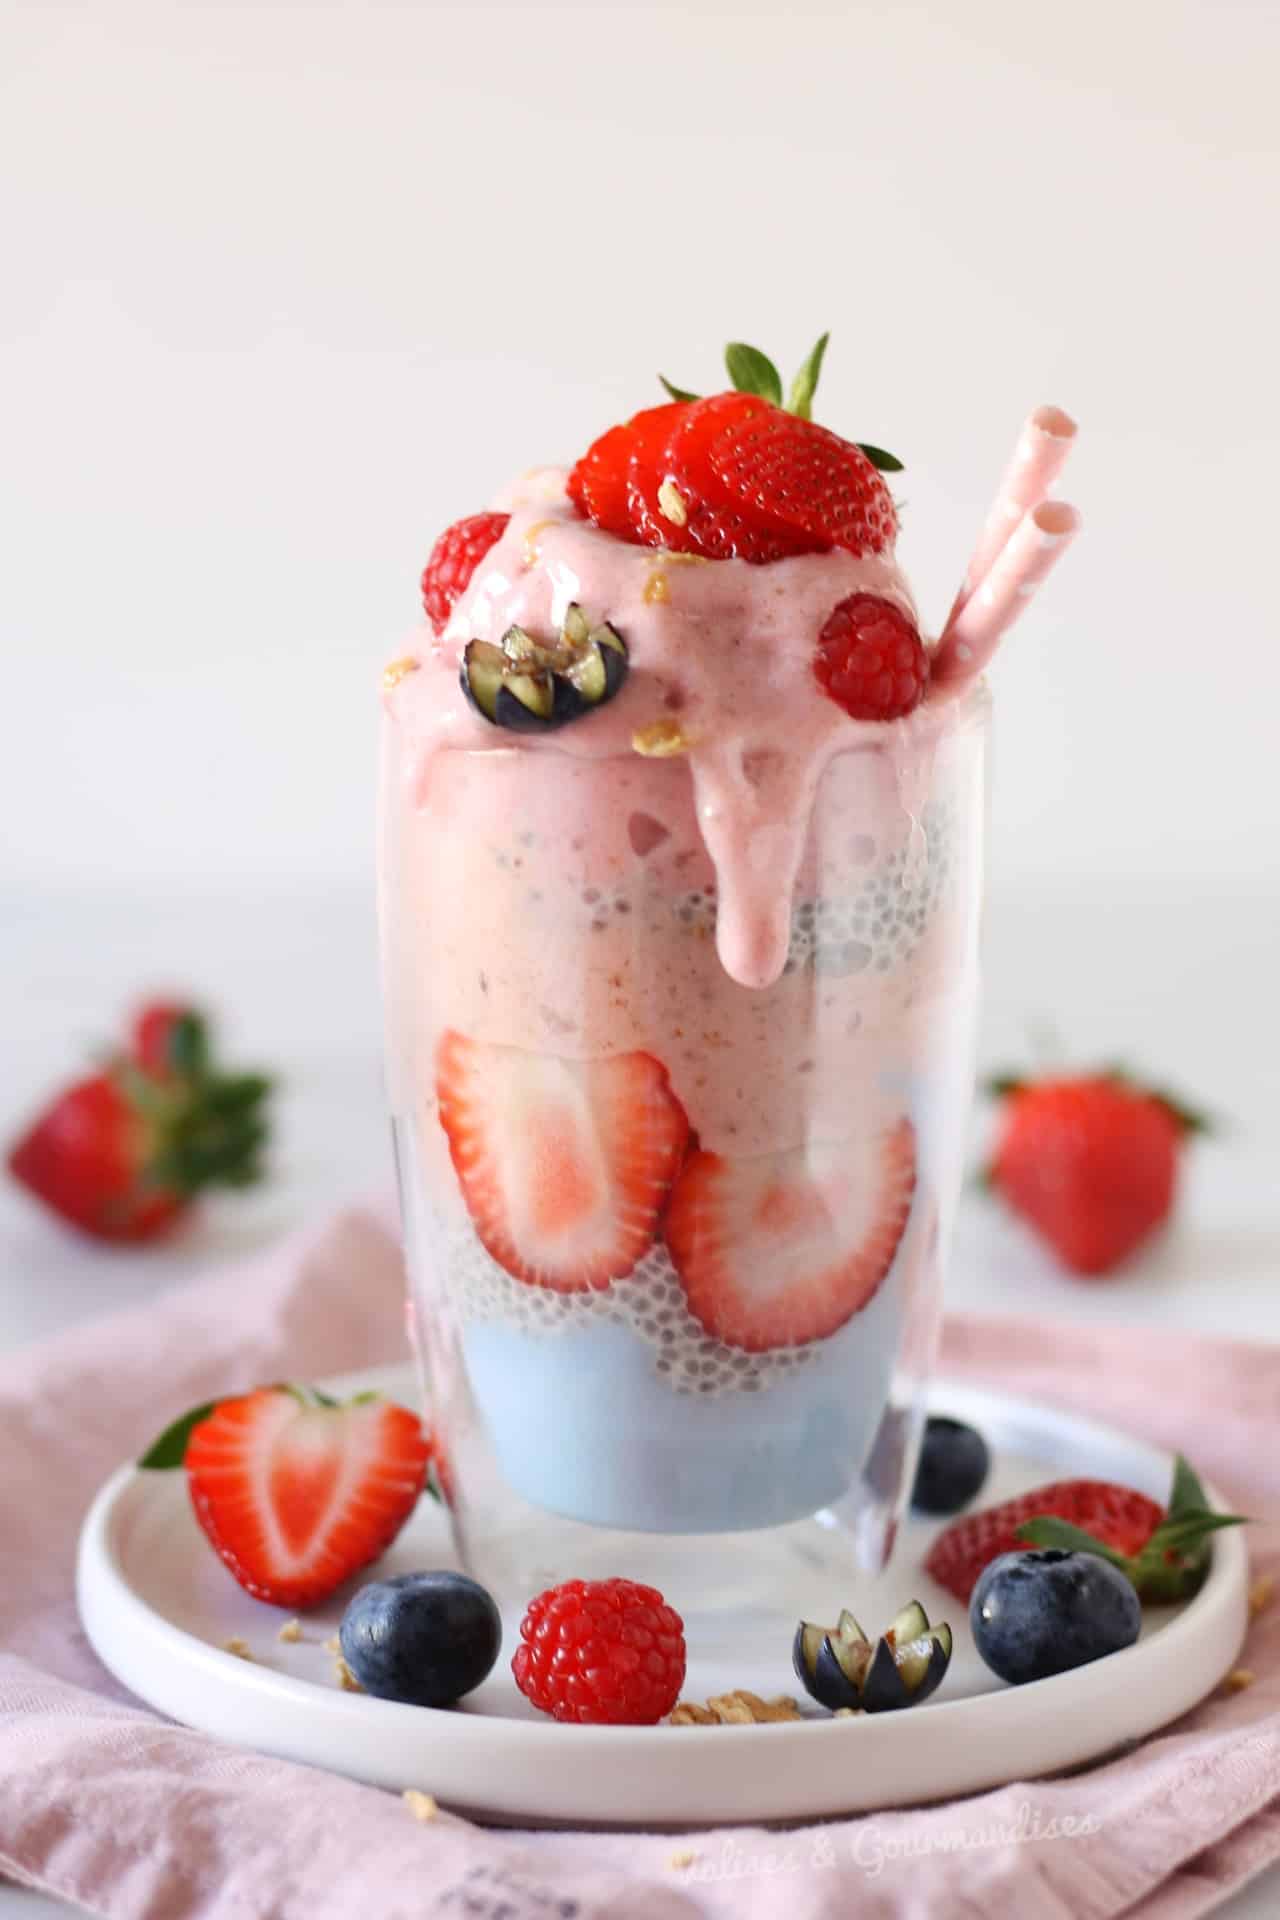 Add a touch of magic to your morning with this fairy nice cream parfait!